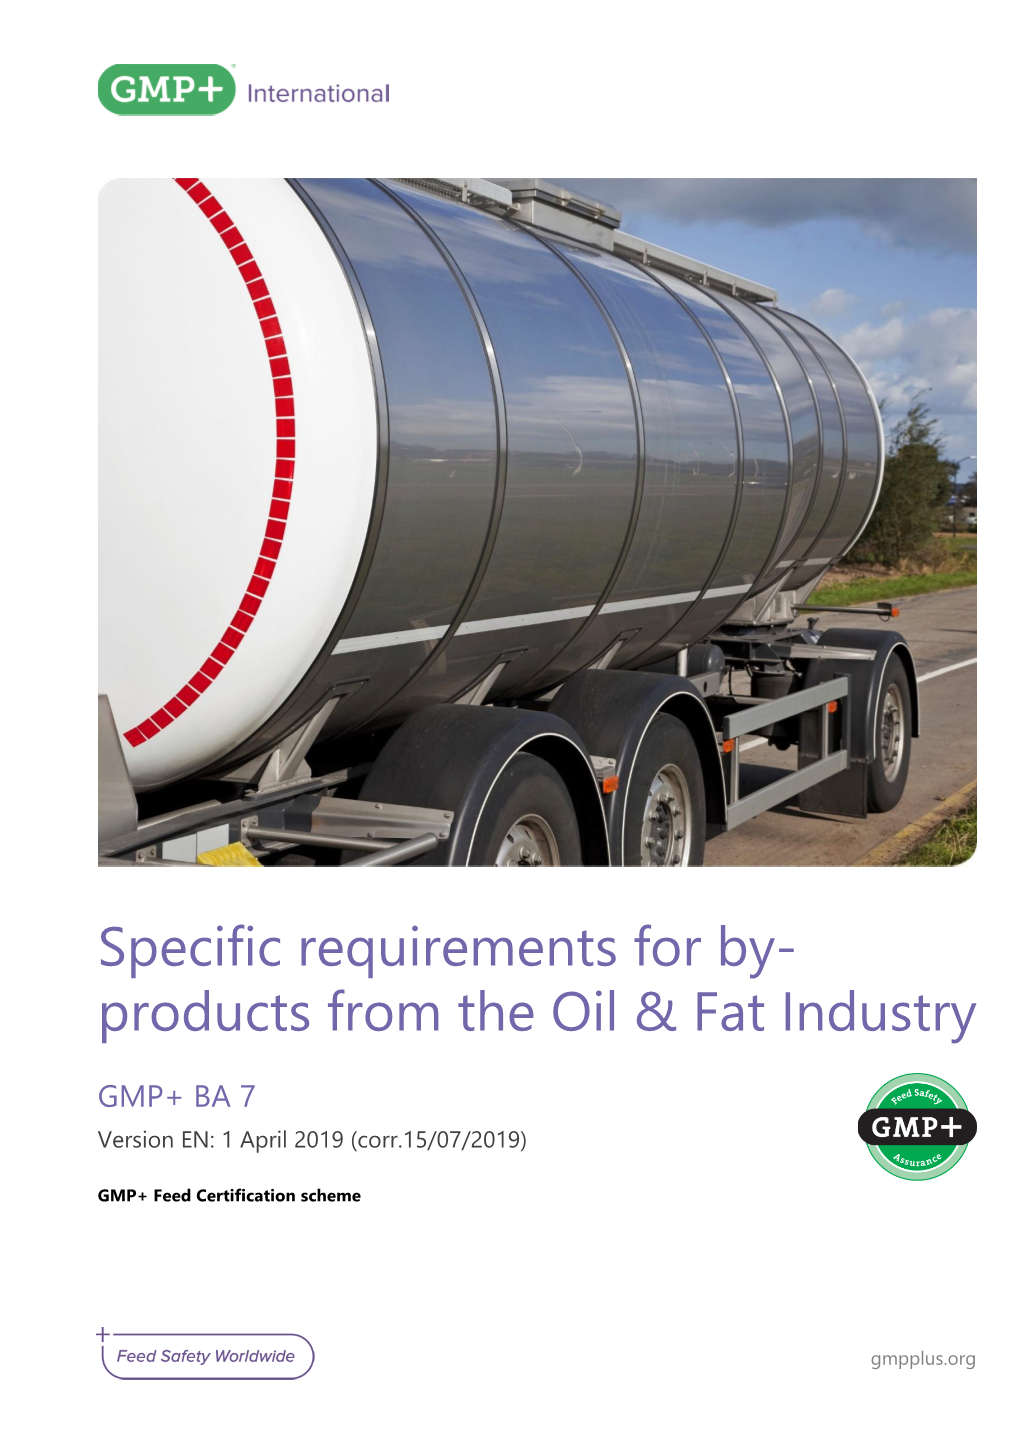 GMP+ BA7 Specific Requirements for By-Products from the Oil & Fat Industry